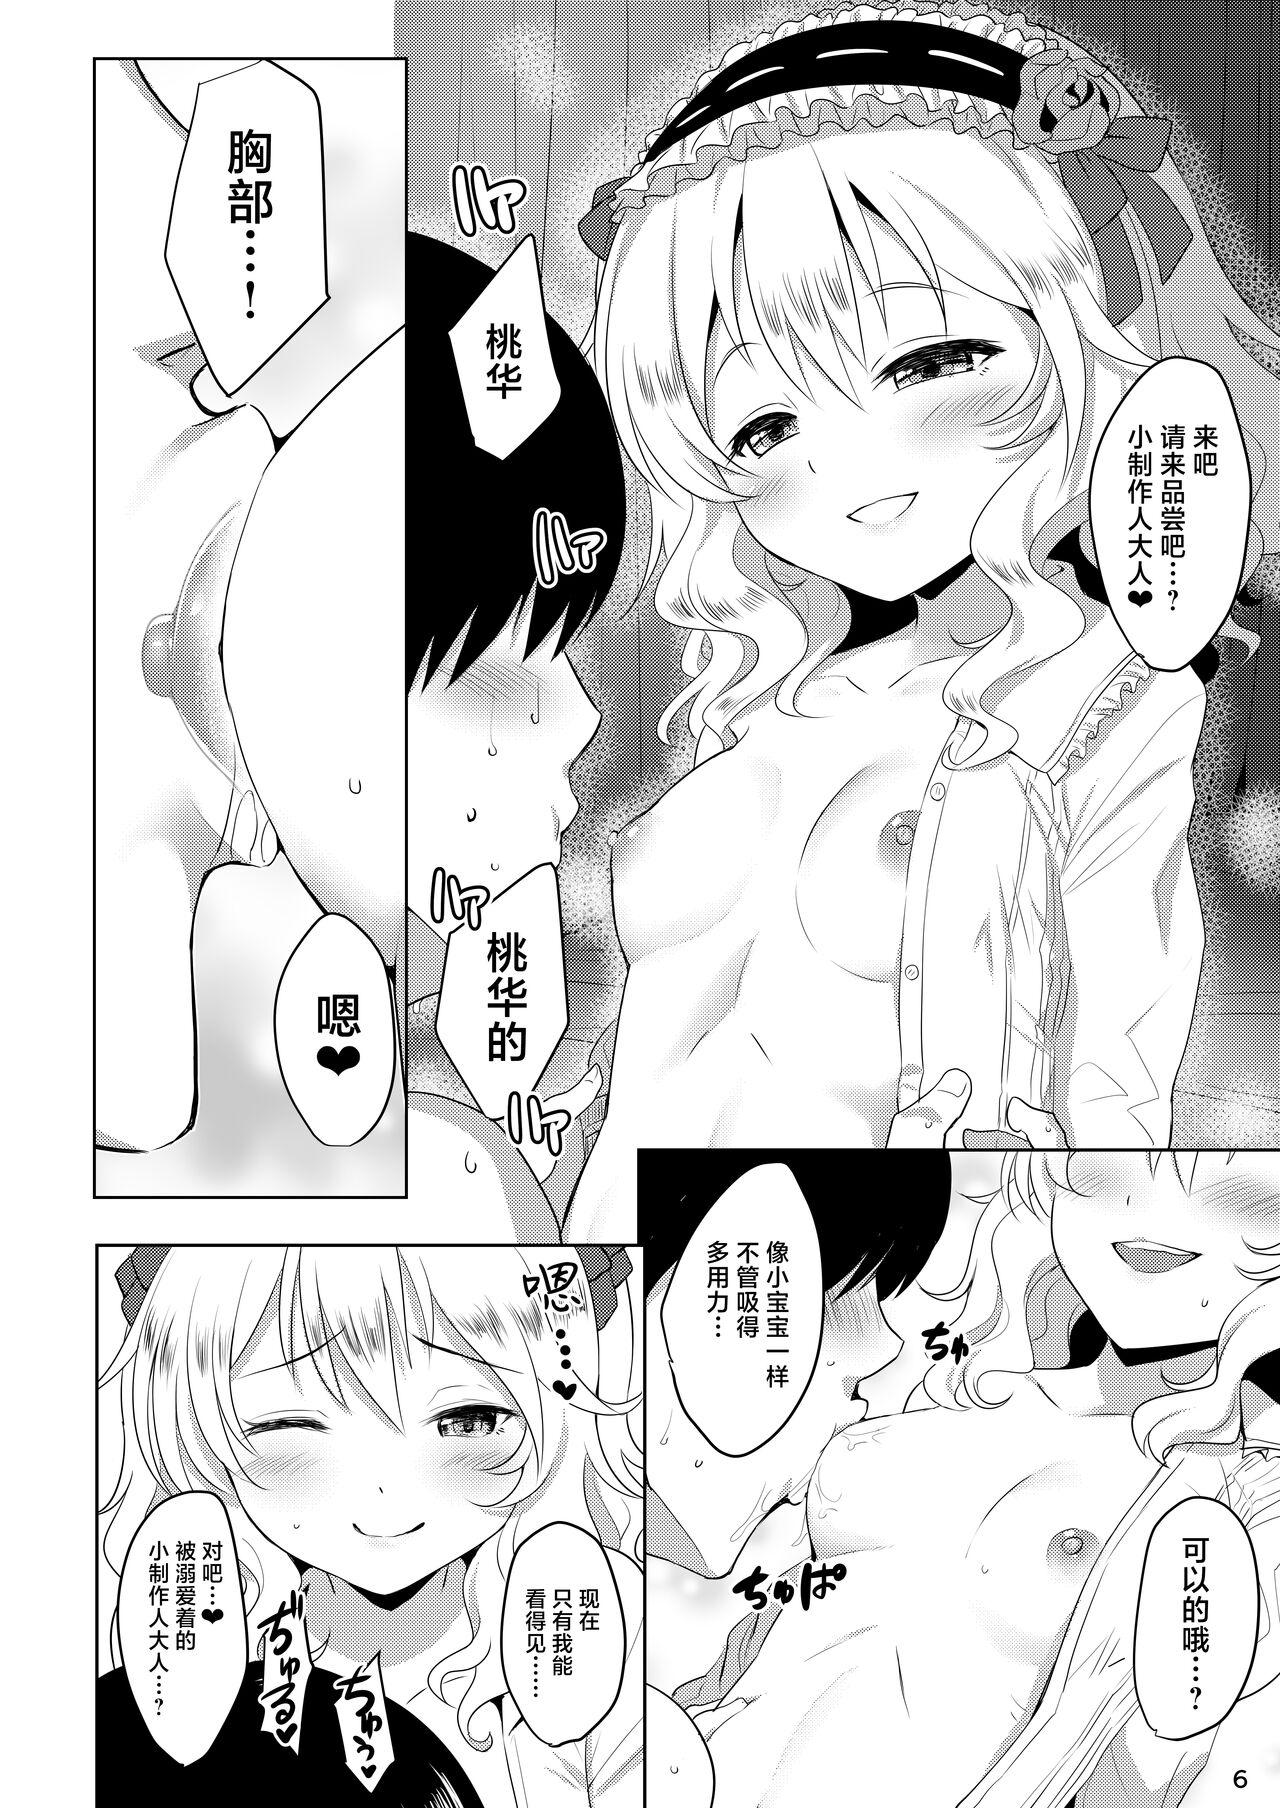 Plug CHAMMER's - The idolmaster Banging - Page 5